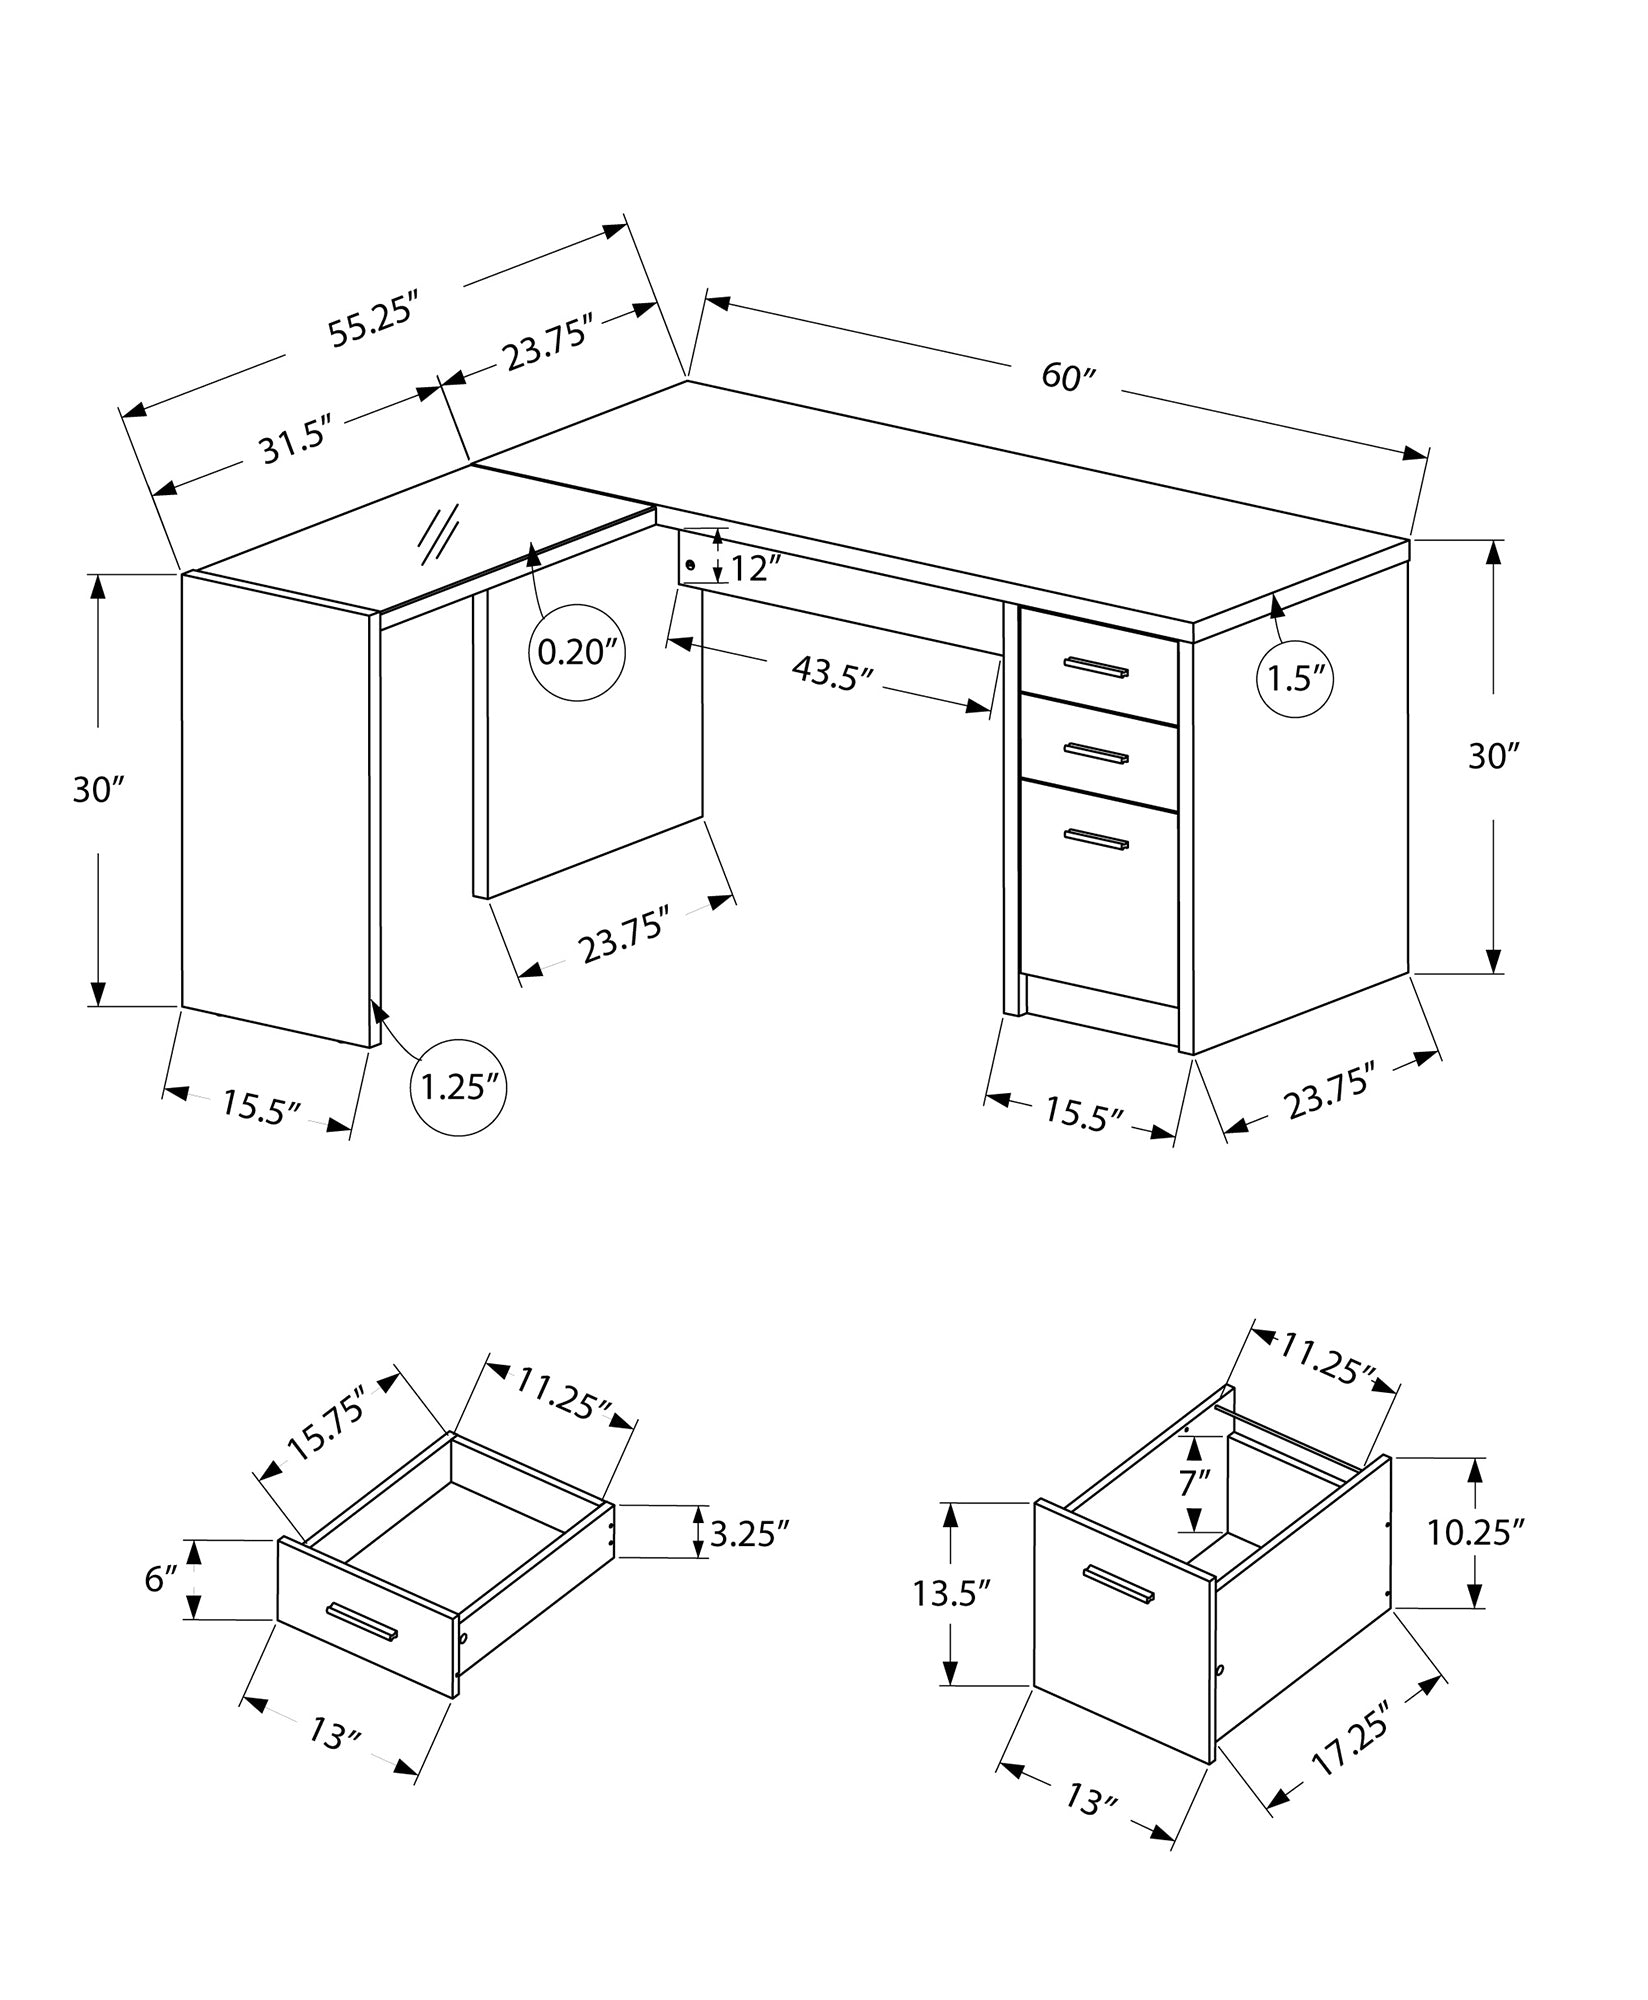 MN-167136    Computer Desk, Home Office, Corner, Left, Right Set-Up, Storage Drawers, L Shape, Laminate, Tempered Glass, White, Contemporary, Modern